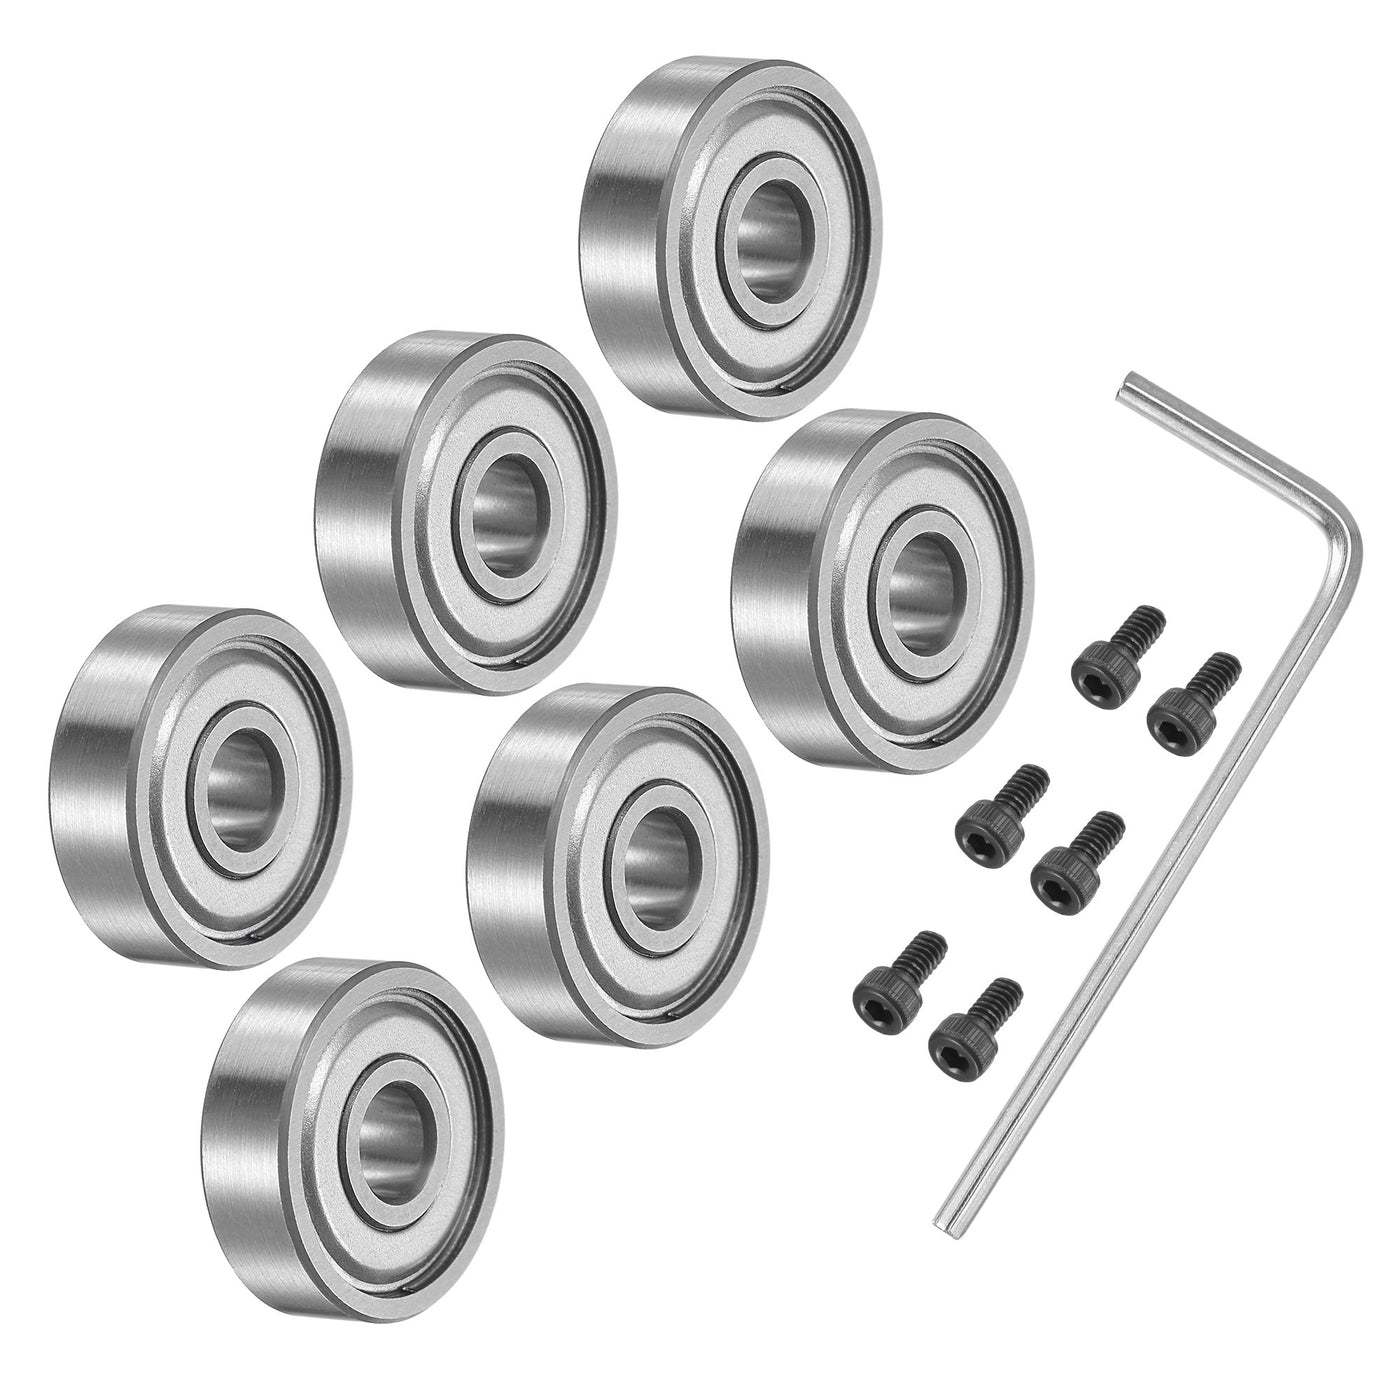 Uxcell Uxcell 6Pcs Bearing Accessory Kit 3/16" I.D. 1/2" OD Top Mounted Bearings for Router Bit (#5-40 x 1/4" Screws)